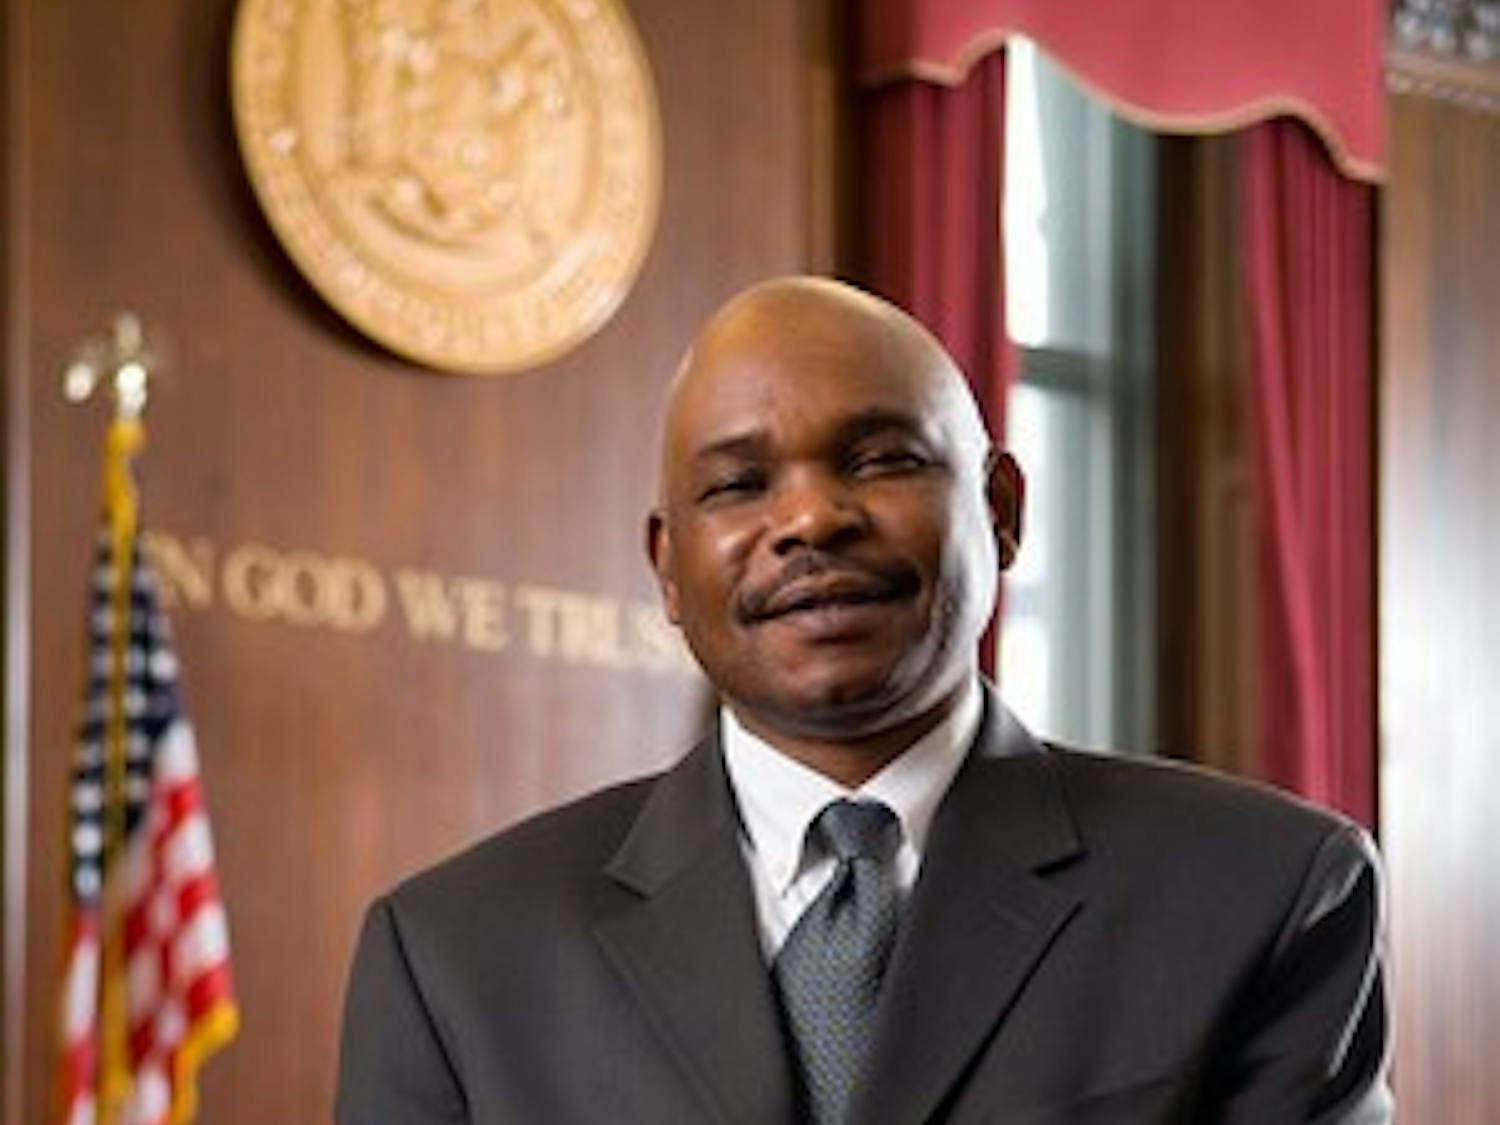 A wrongful termination suit against former UB Law School Dean Makau Mutua&nbsp;was recommend to be dismissed this week. The lawsuit, filed by former UB law professor Jeffrey Malkan, claims Mutua denied his due process rights when he fired him in 2009.&nbsp;